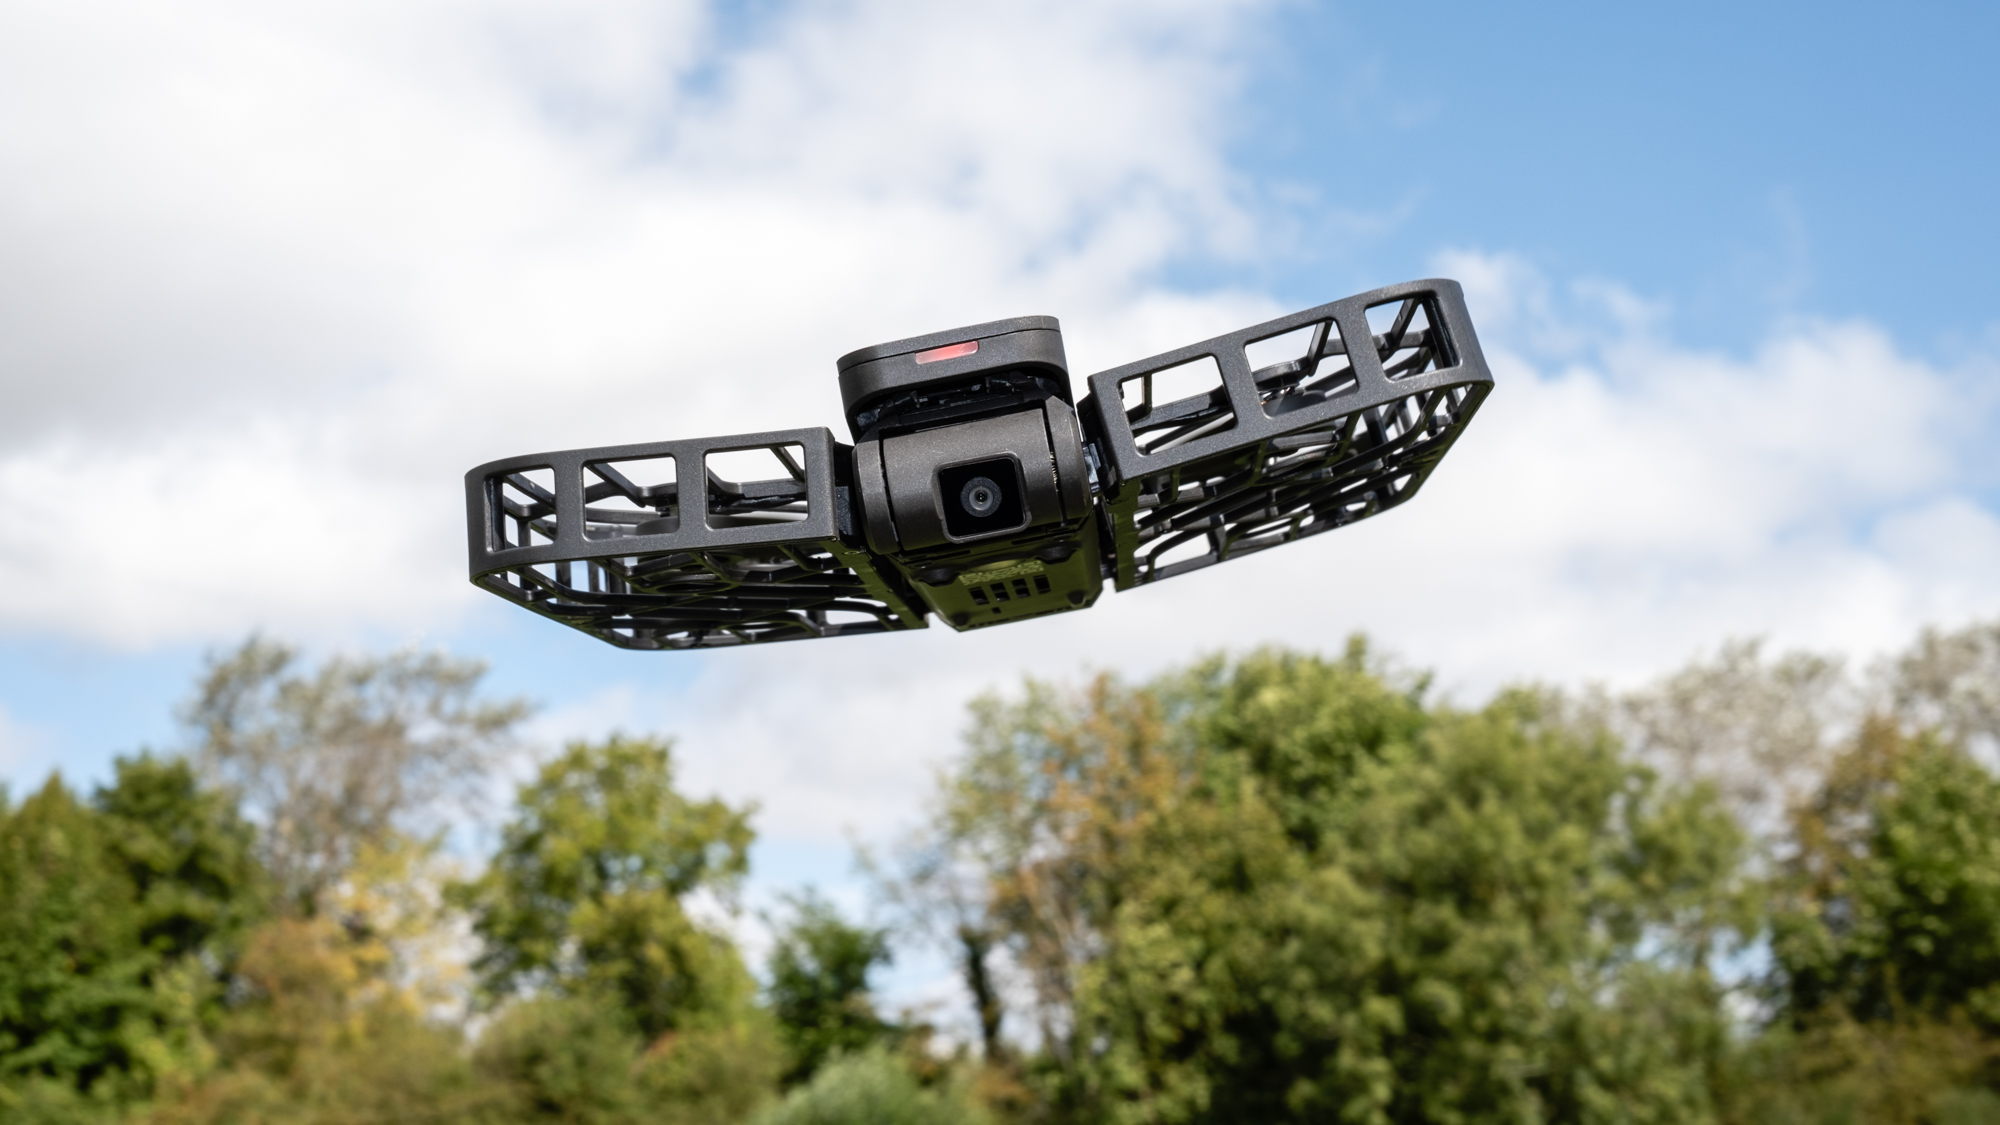 Self-Stabilizing Photography Drones : HOVERAir X1 Self-Flying Camera